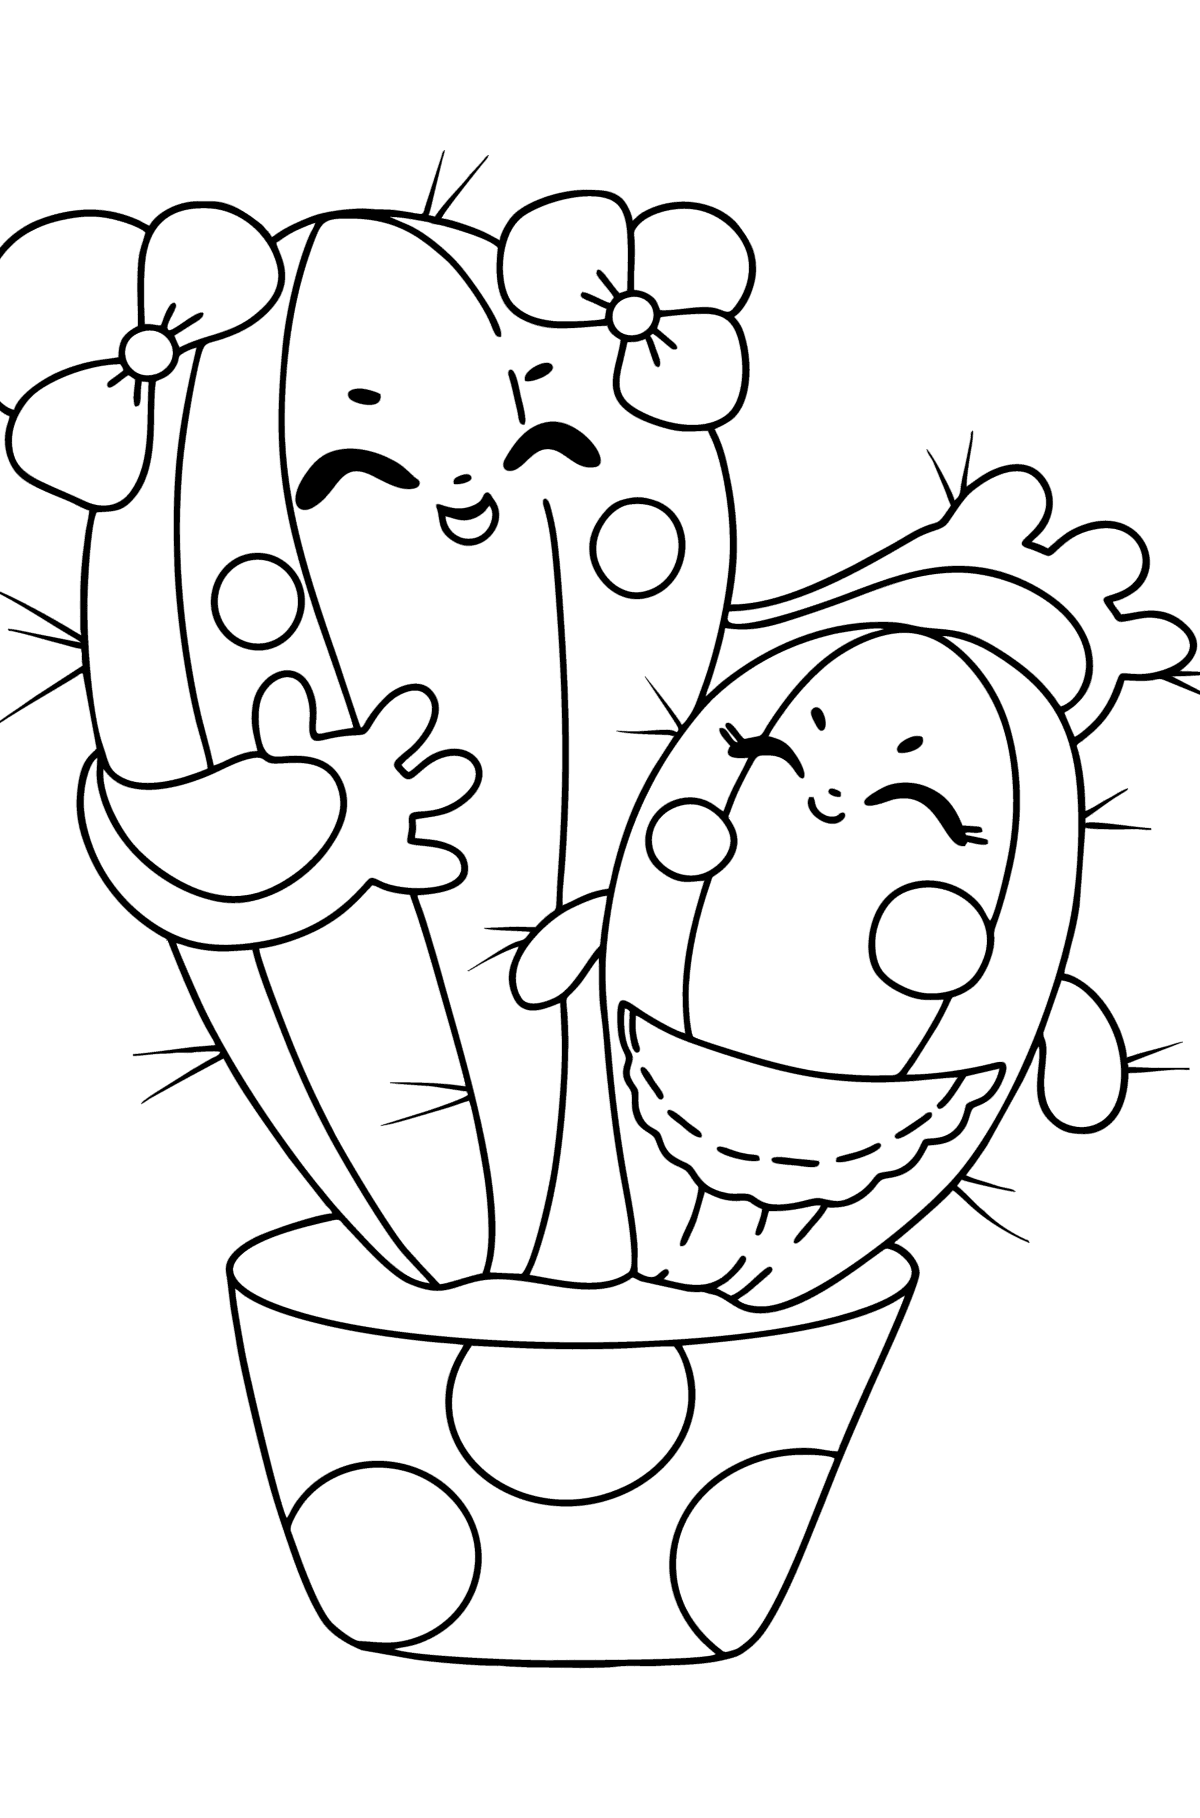 Cactus coloring pages - Download, Print, and Color Online!